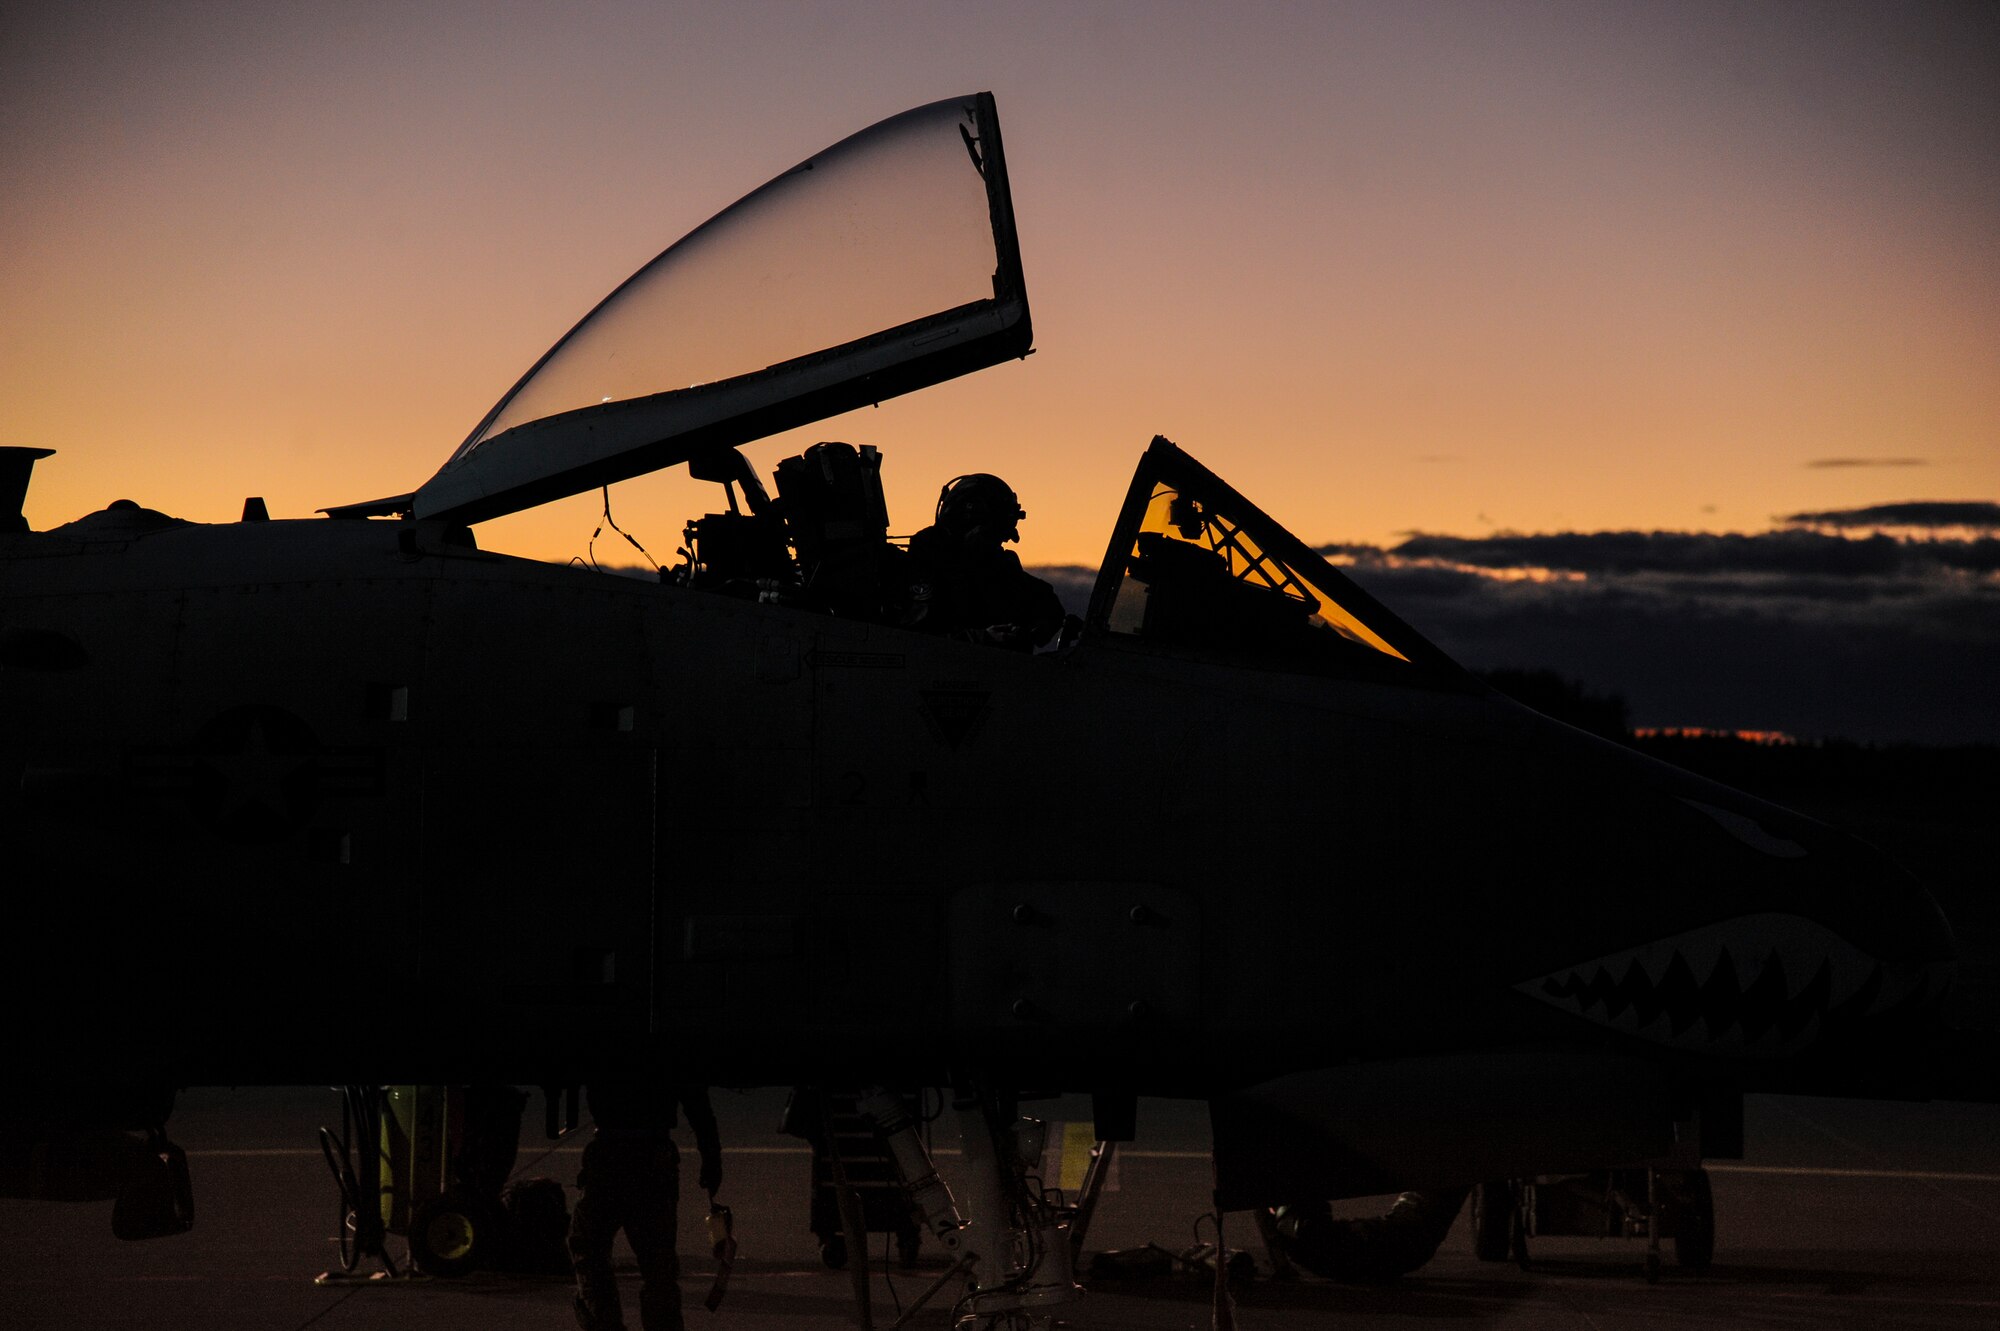 U.S. Air Force Capt. Chandra Fleming, 74th Expeditionary Fighter Squadron pilot, preforms pre-flight inspections in the cockpit of an A-10 Thunderbolt II attack aircraft on the flightline, Nov. 23, 2015, at Amari Air Base, Estonia. Pilots from 74th EFS capitalized on Estonia’s early sunset to maintain proficiency in night-flying operations. (U.S. Air Force photo by Andrea Jenkins/Released)